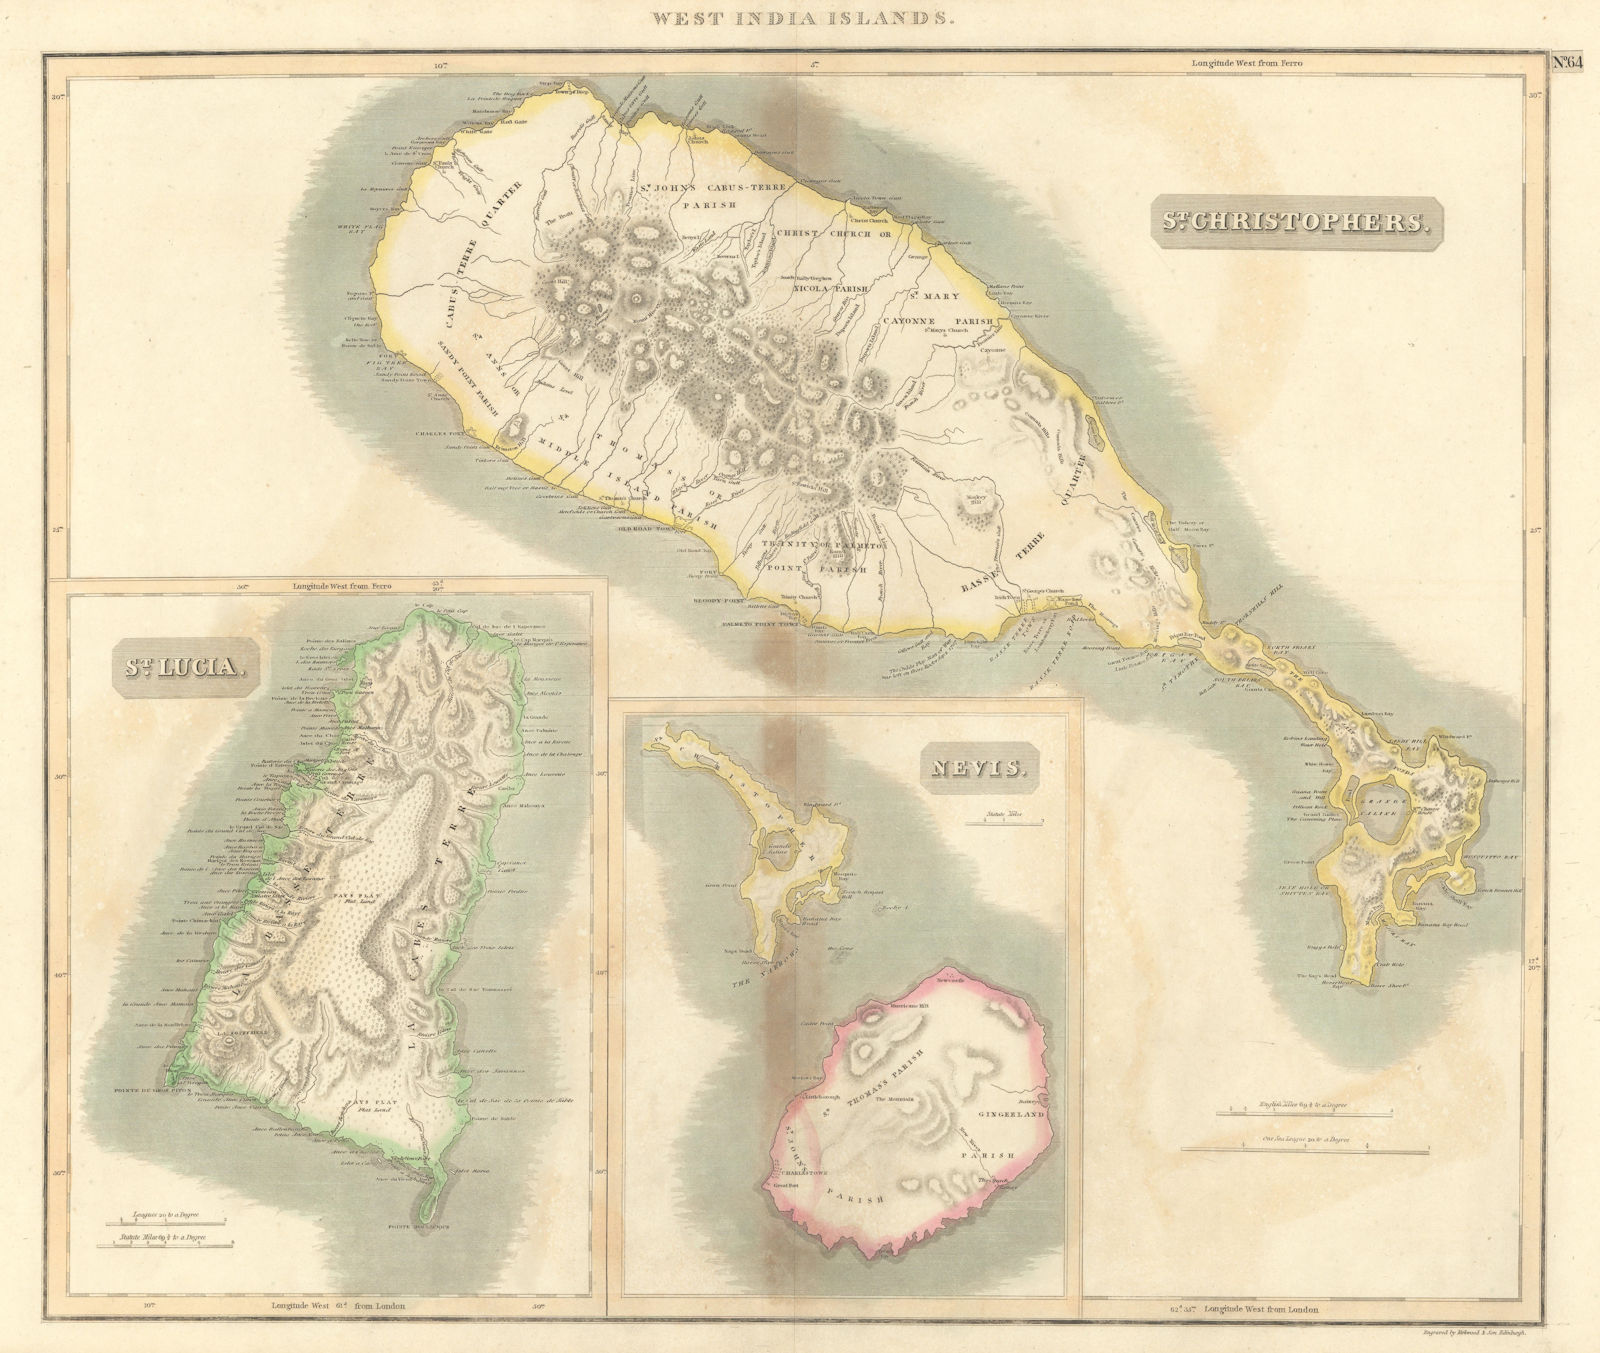 St Christophers, Nevis & St Lucia. St Kitts. West Indies. THOMSON 1817 old map